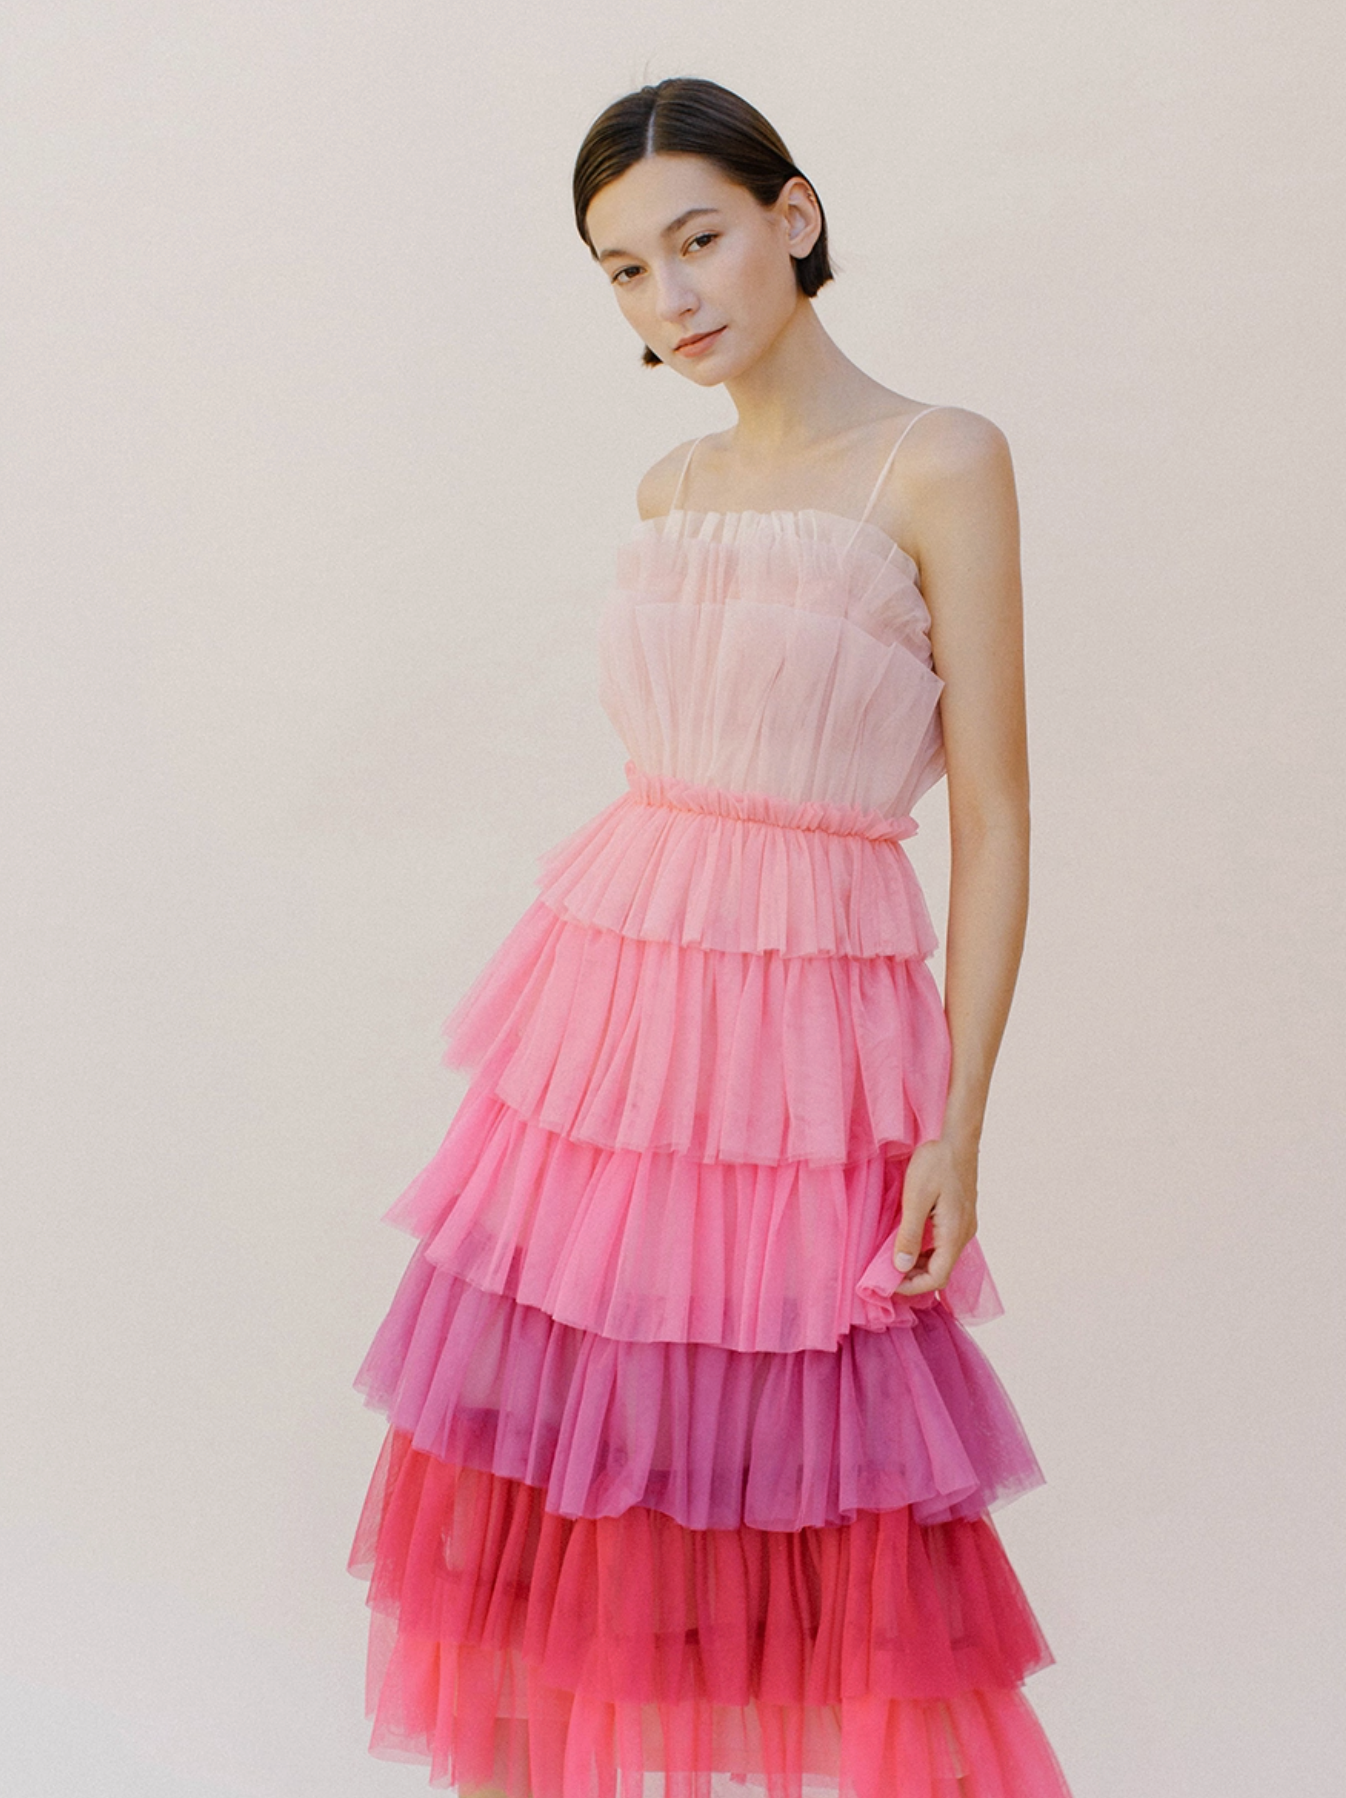 Storia-Pink Tiered Tulle Dress